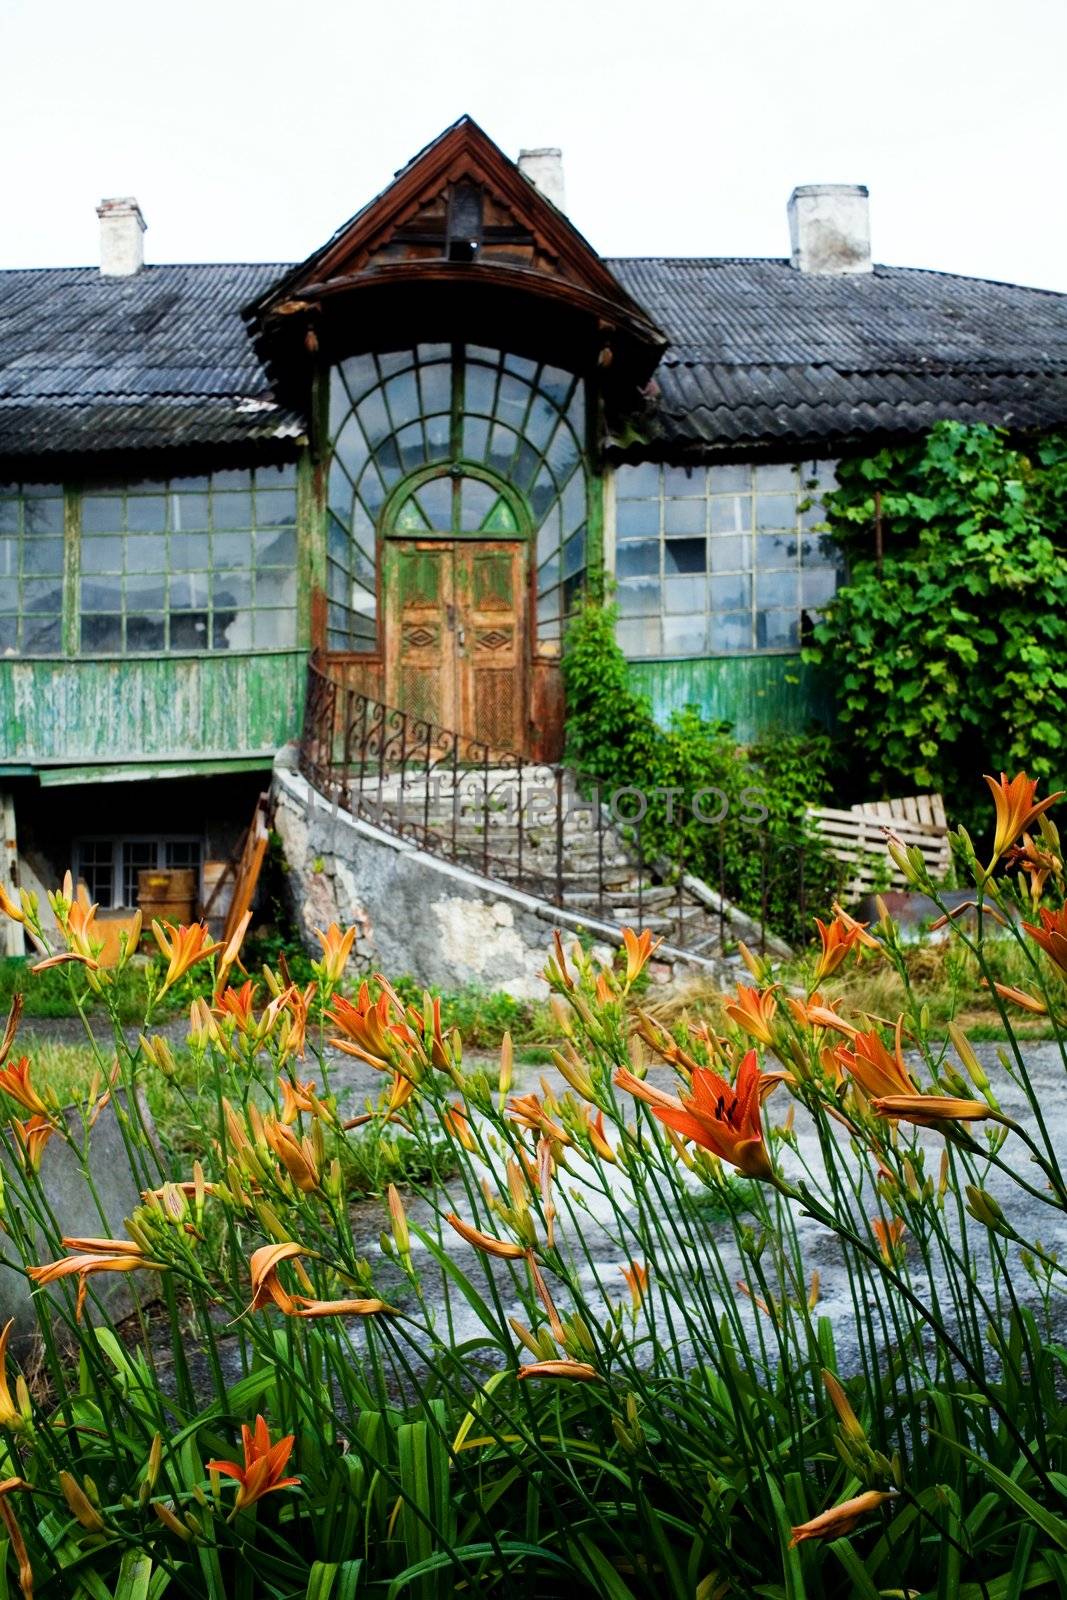 An image of house with wild grapes and flowers